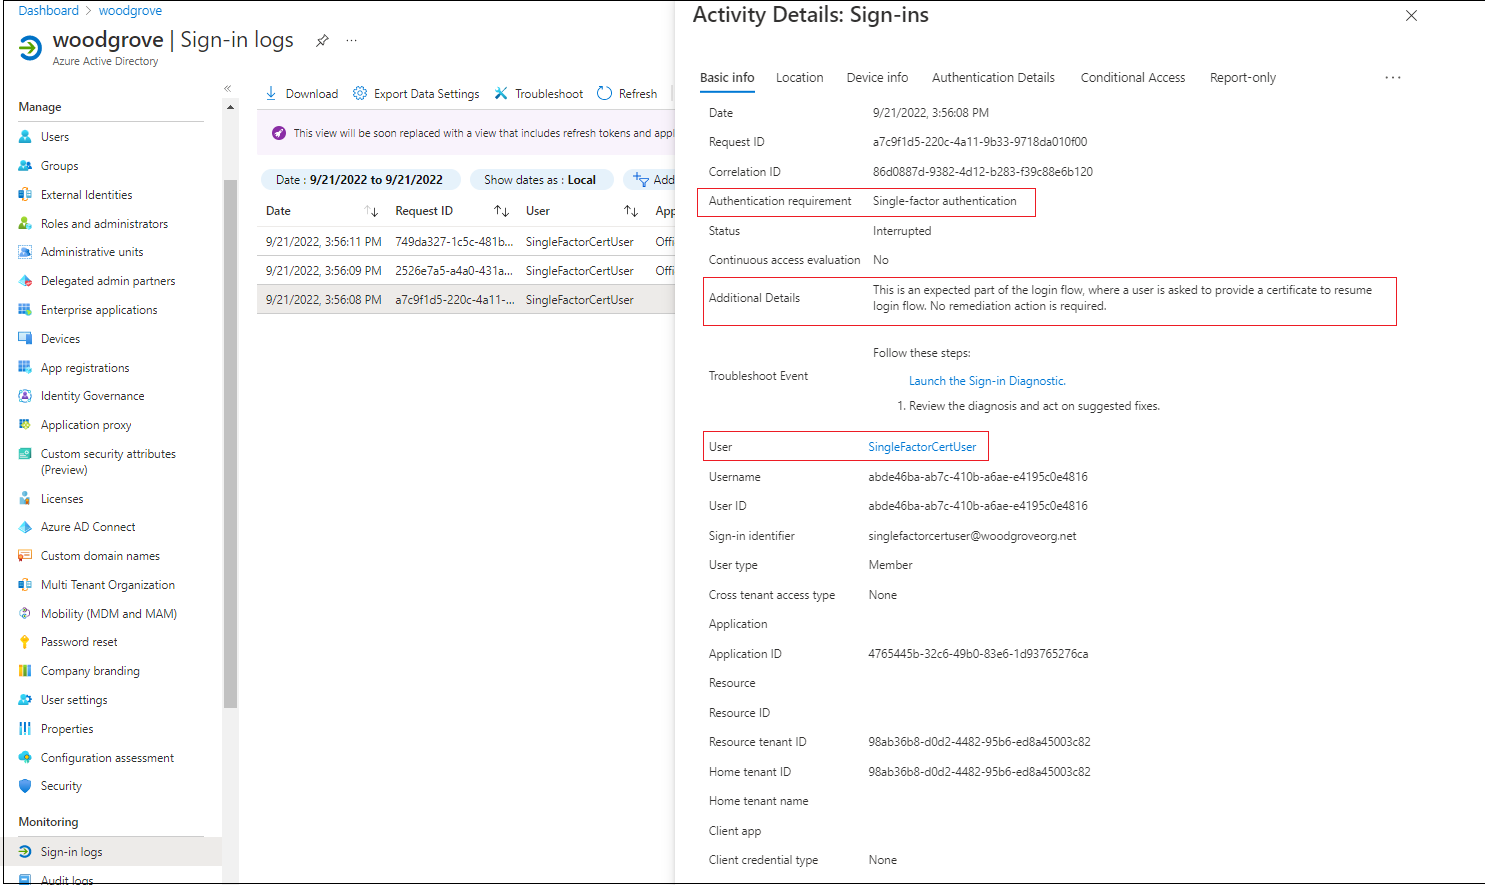 Screenshot of activity details in the sign-in logs.